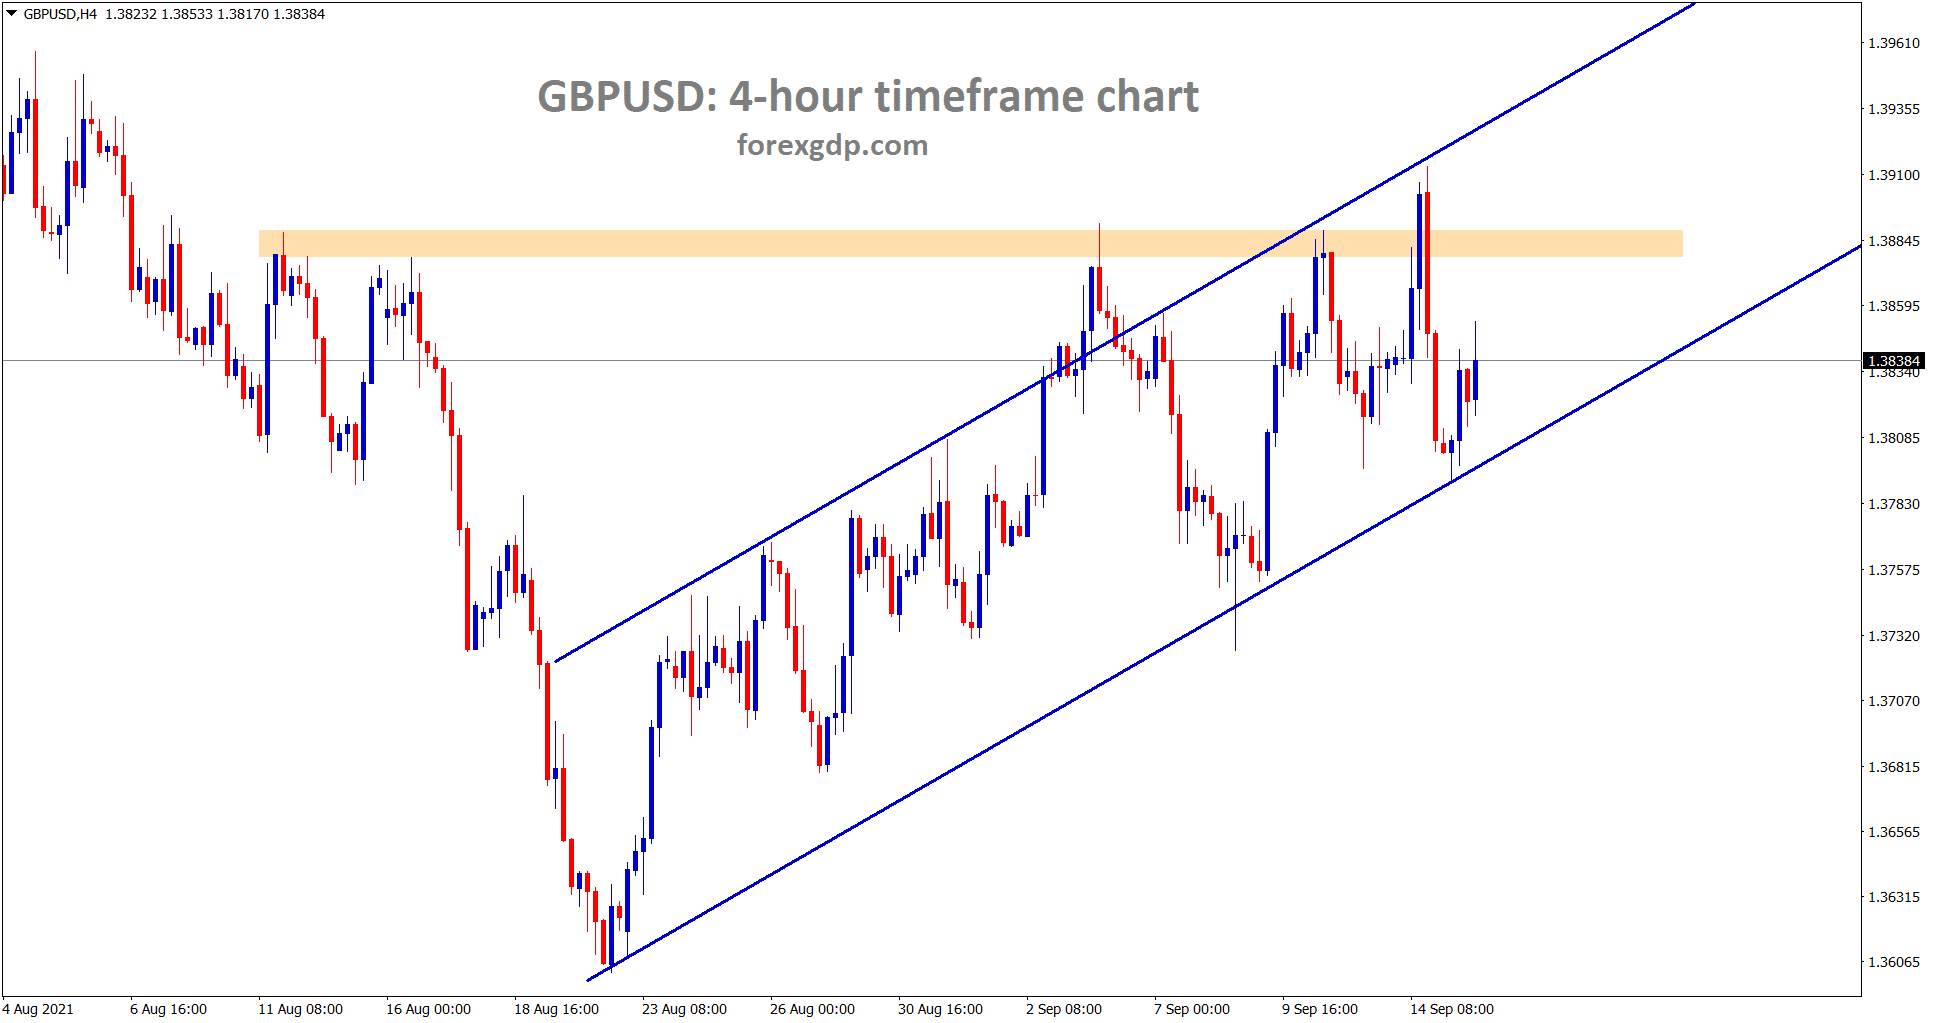 GBPUSD is moving in an Ascending channel range